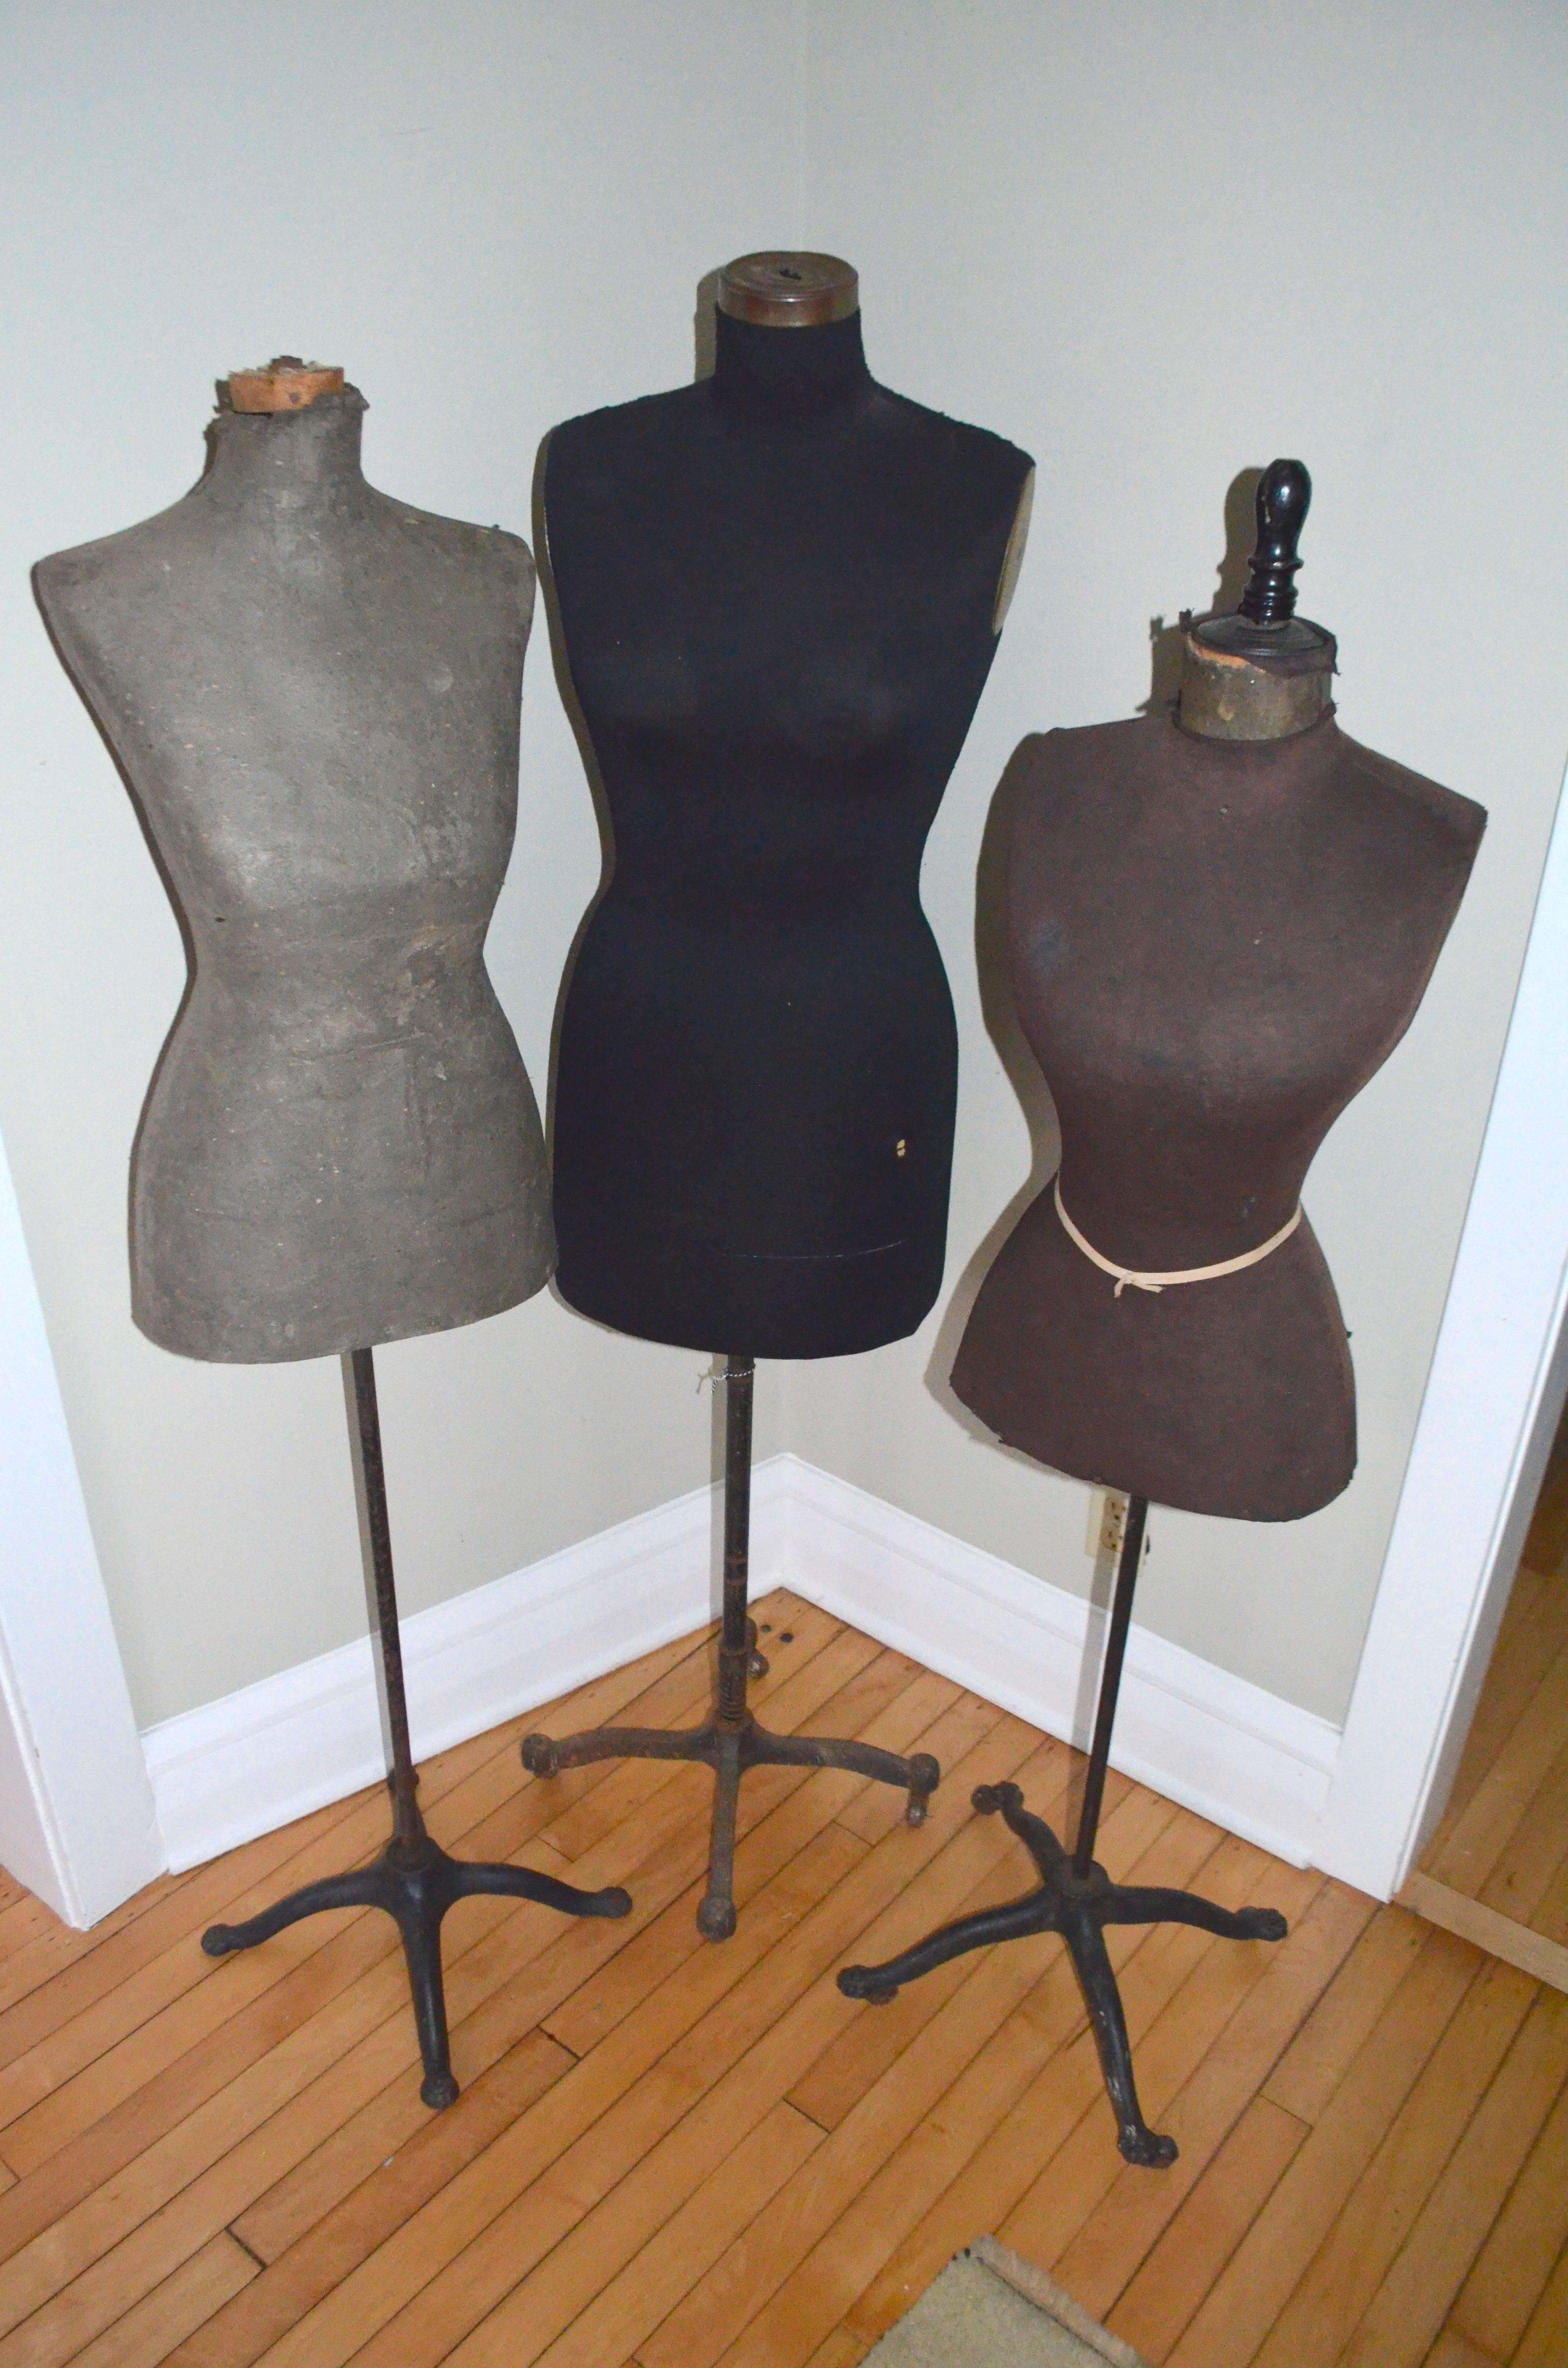 Mid-century, adjustable-height, seamstress dress forms. Sold as a set of three. These ladies make quite the stunning trio with their varying subtle coloration and the visual joy of their bodily curves. Simple elegance and sophistication personified.